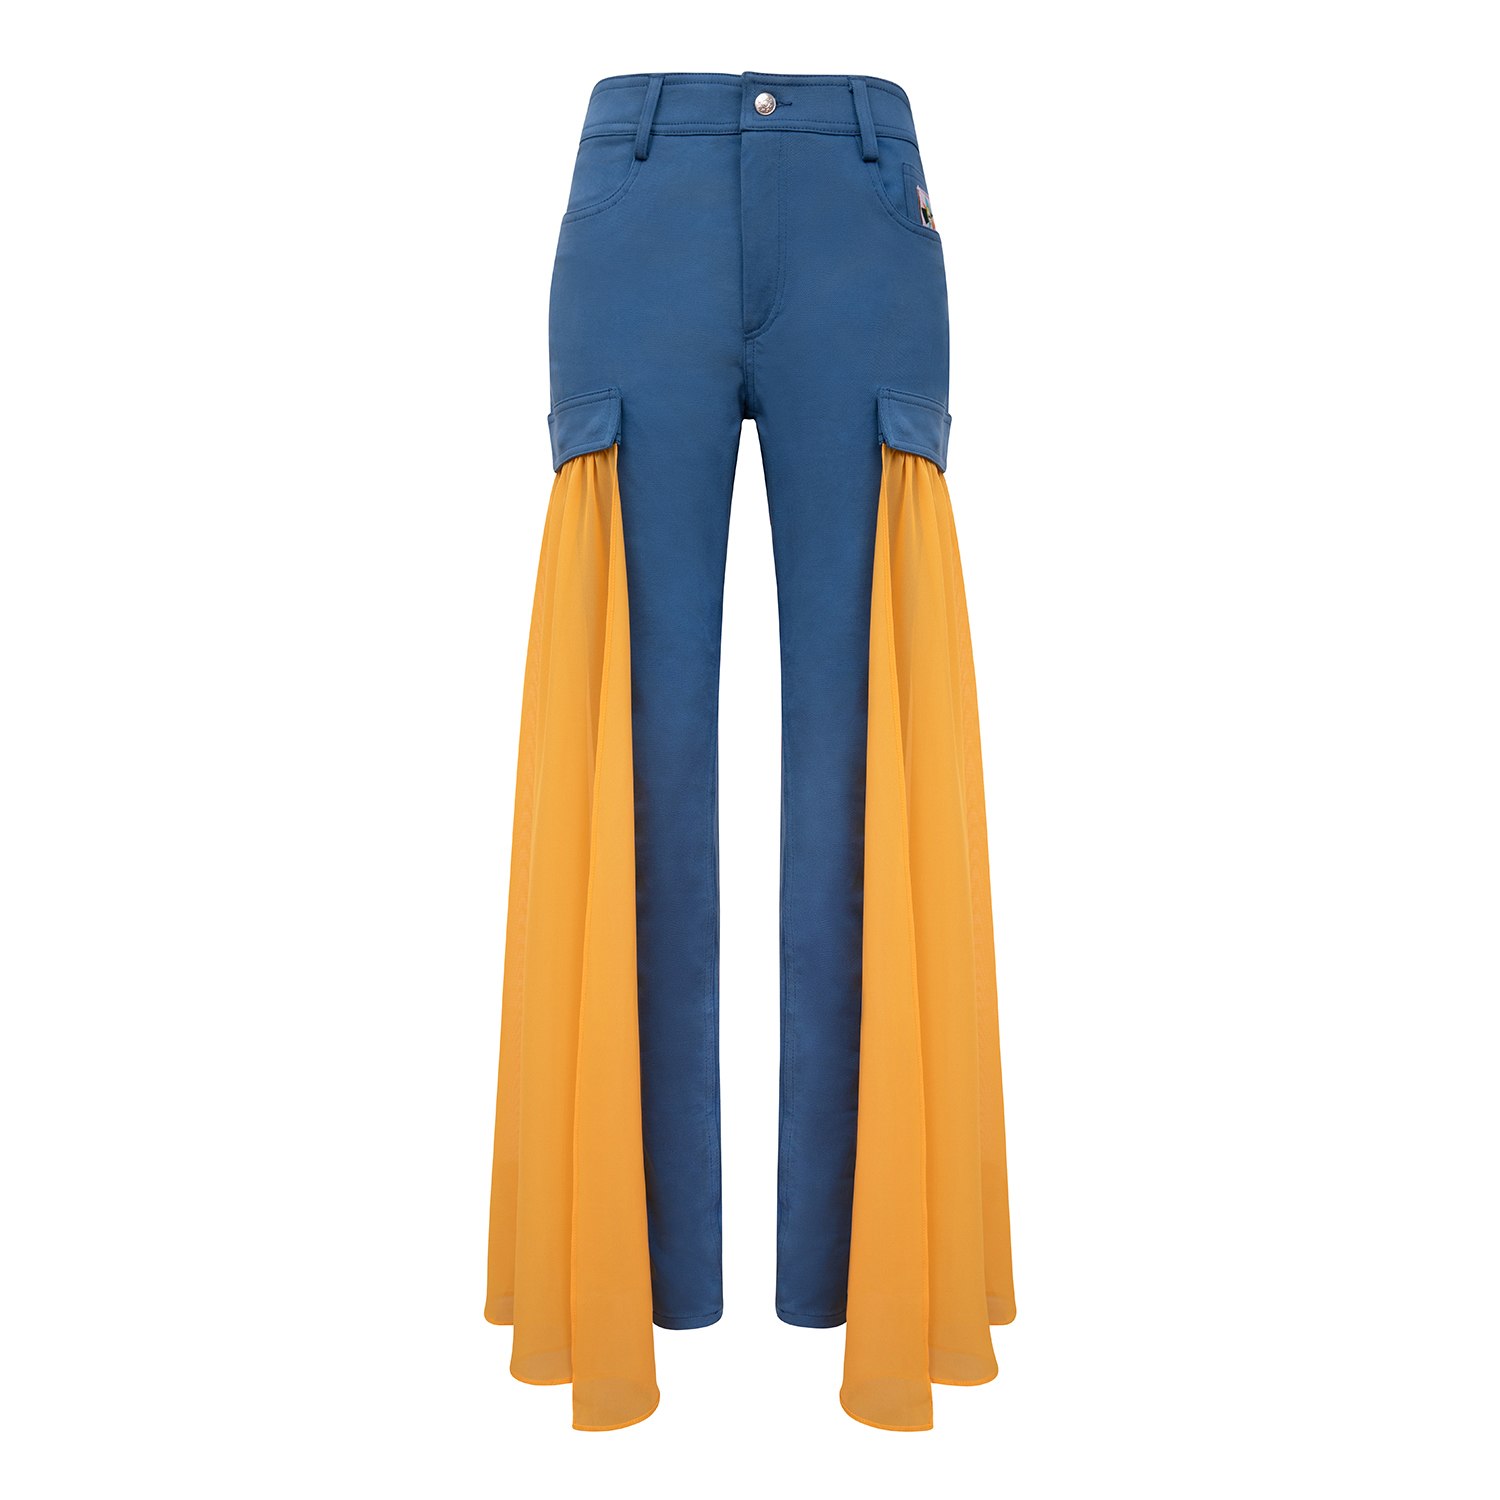 Blonde Gone Rogue Blue / Yellow / Orange Wildflower Skinny Jeans With Veils, Upcycled Cotton, In Denim Blue & Yellow